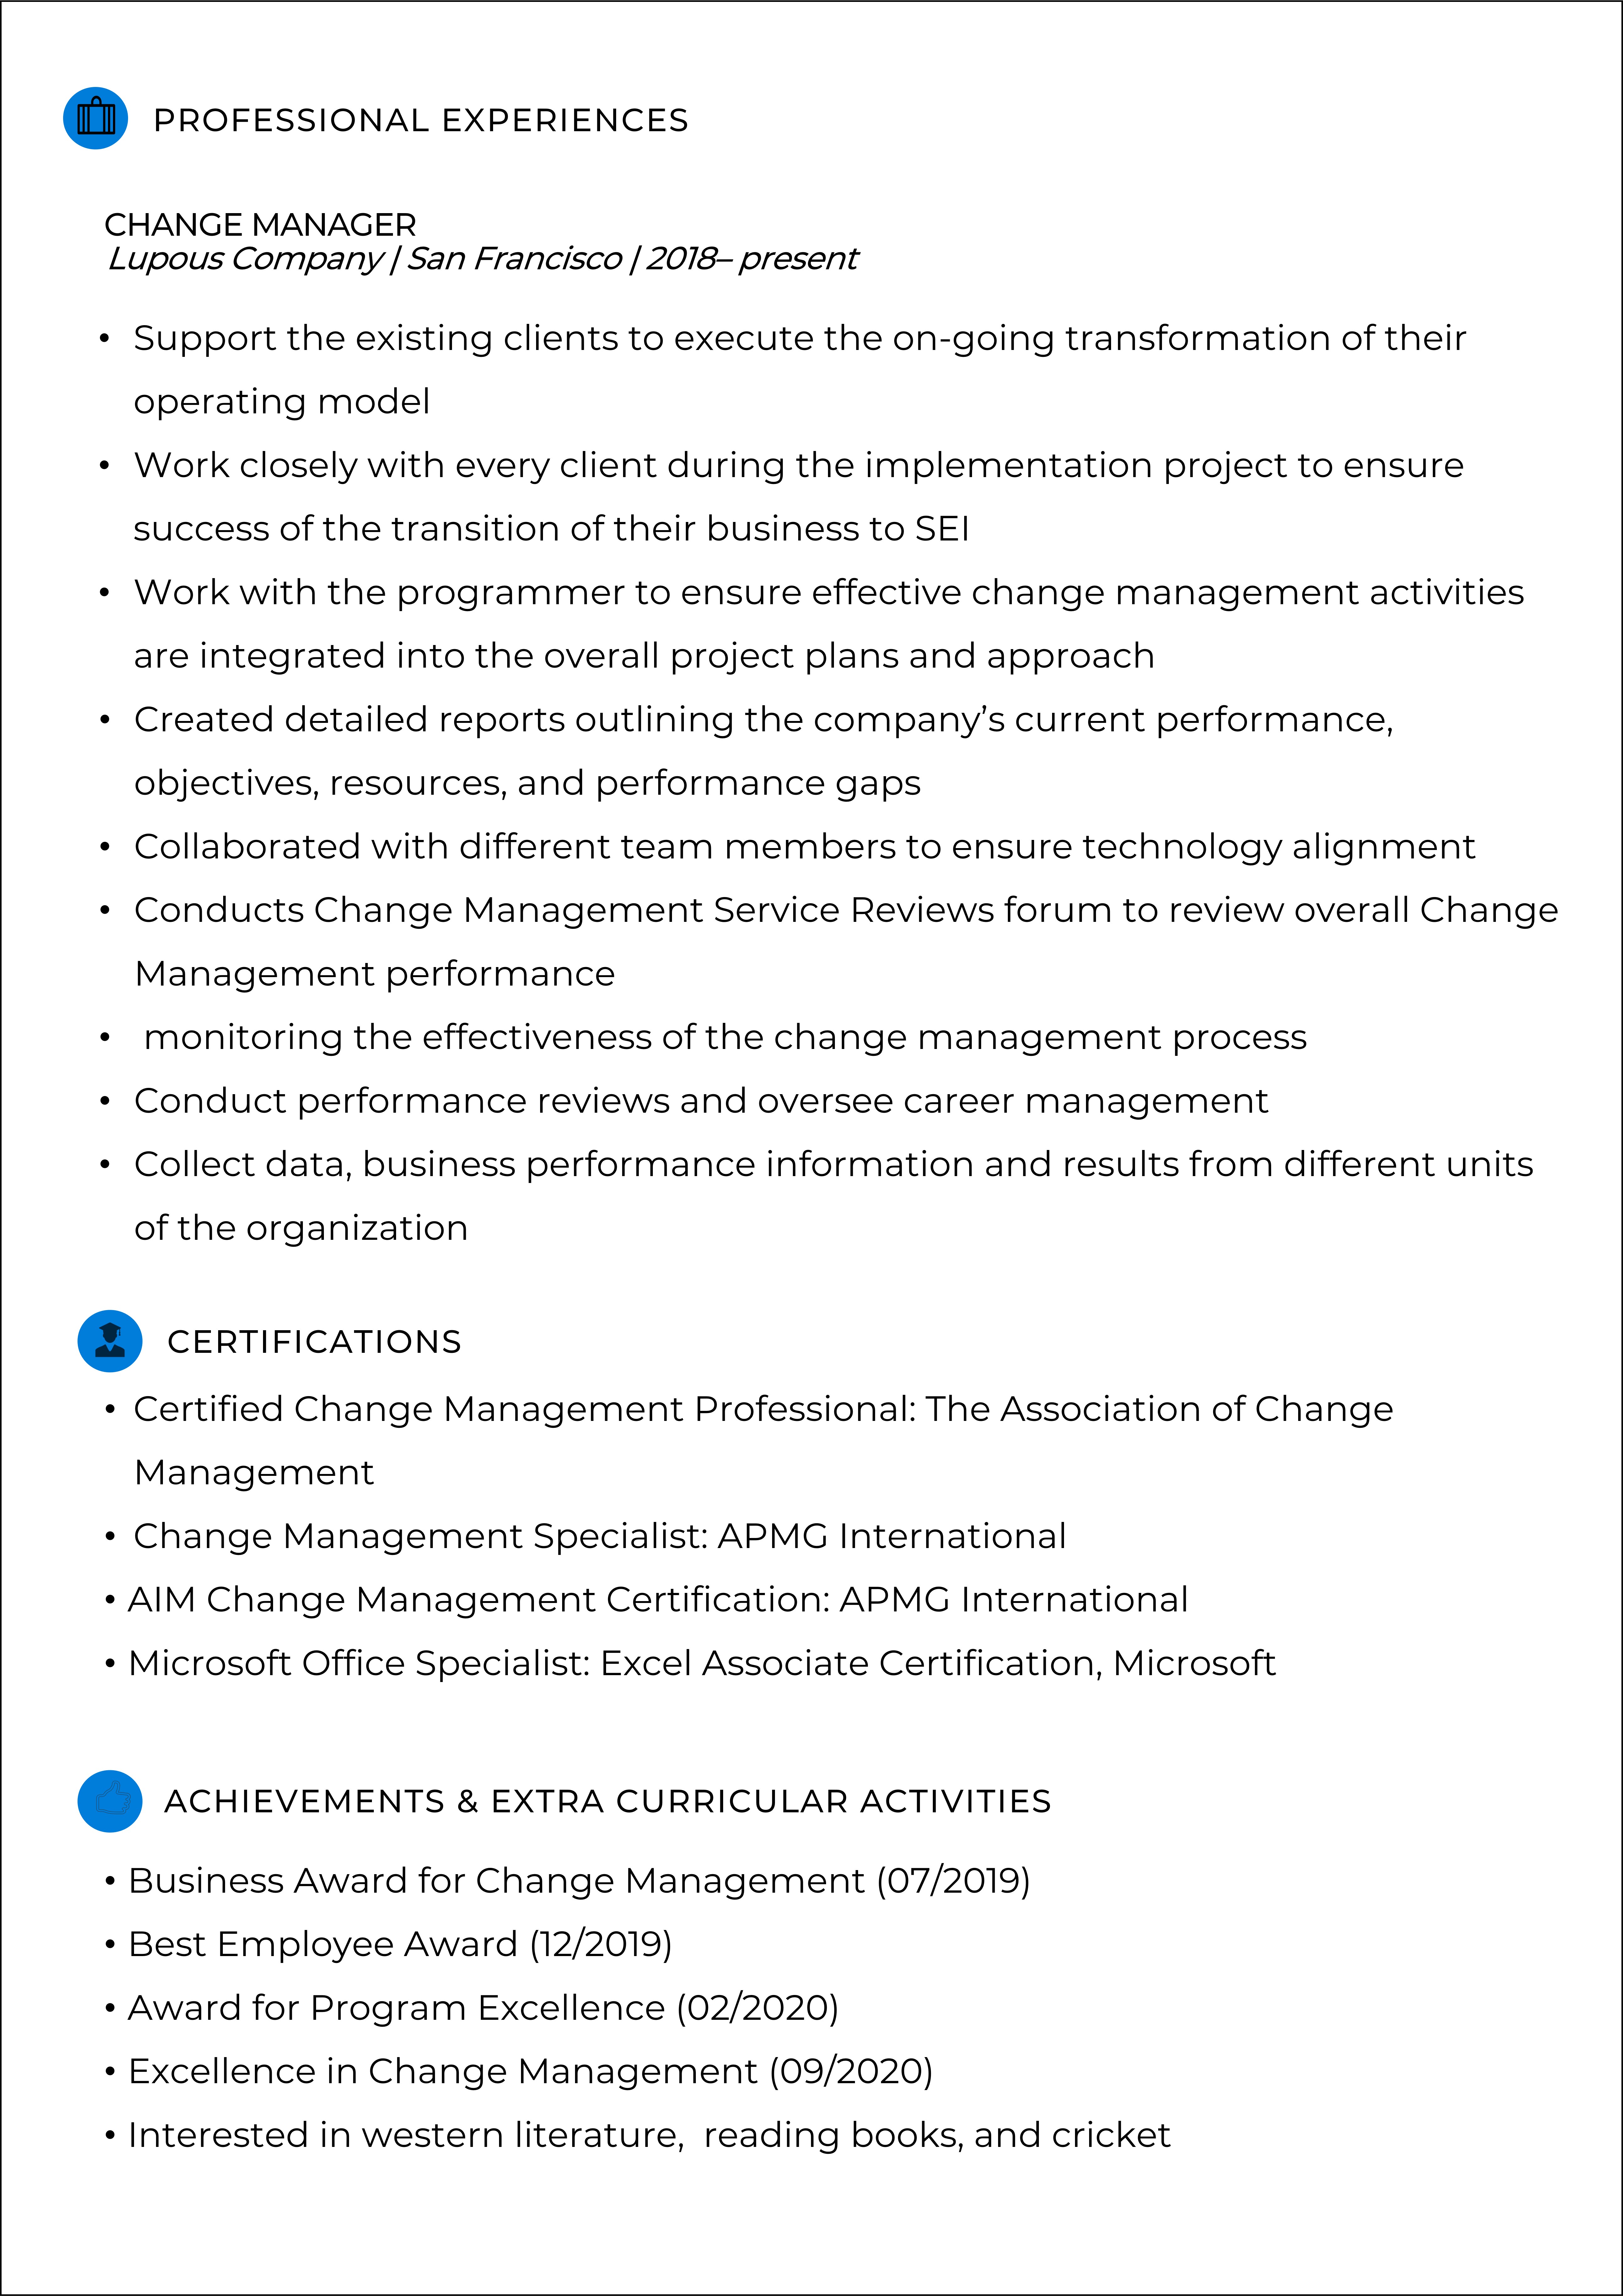 Change Manager Resume - Change Manager Resume - Invensis Learning